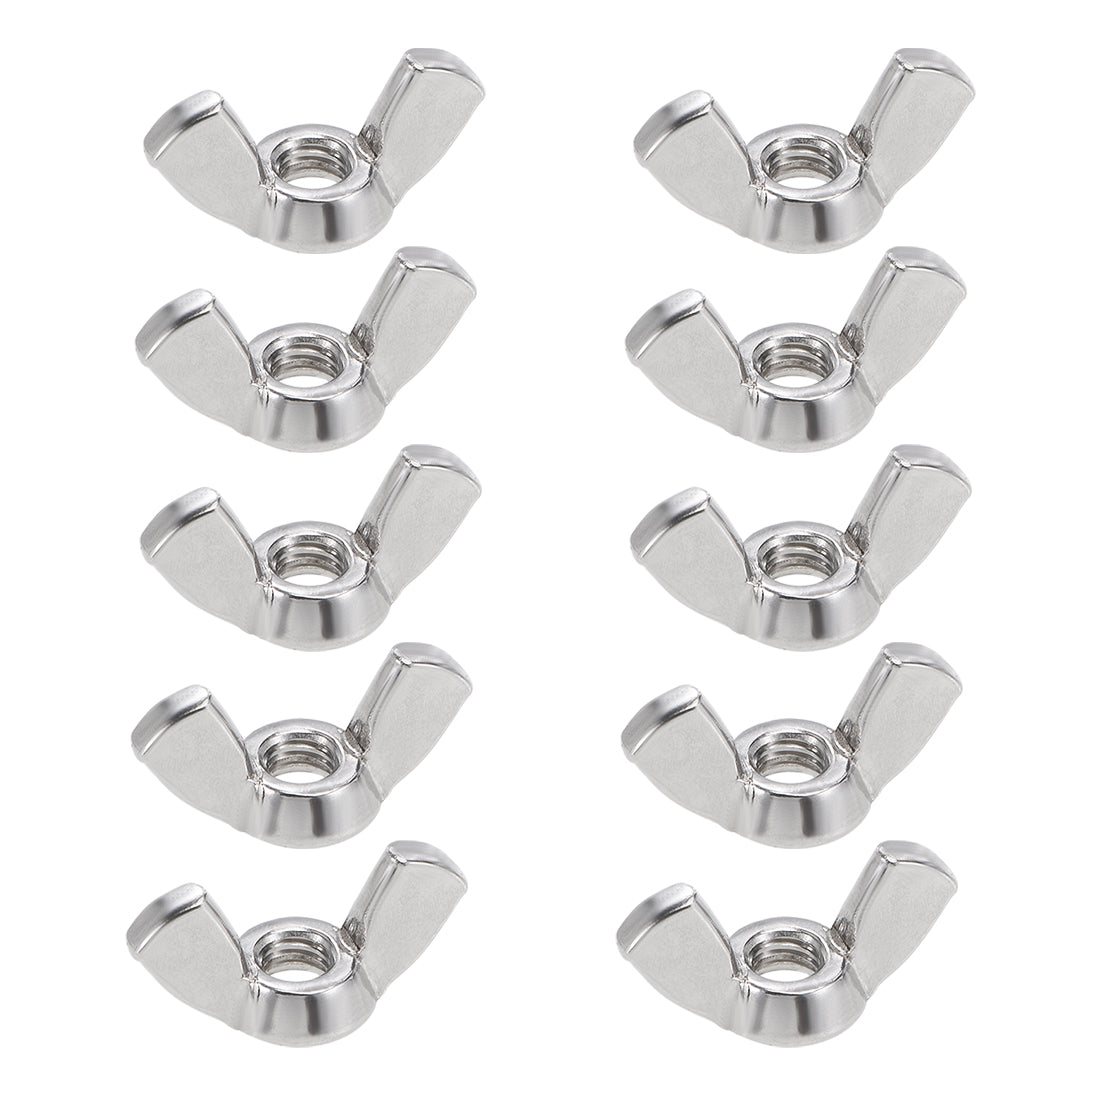 uxcell Uxcell #10-32 Wing Nuts 304 Stainless Steel Shutters Butterfly Nut 10pcs